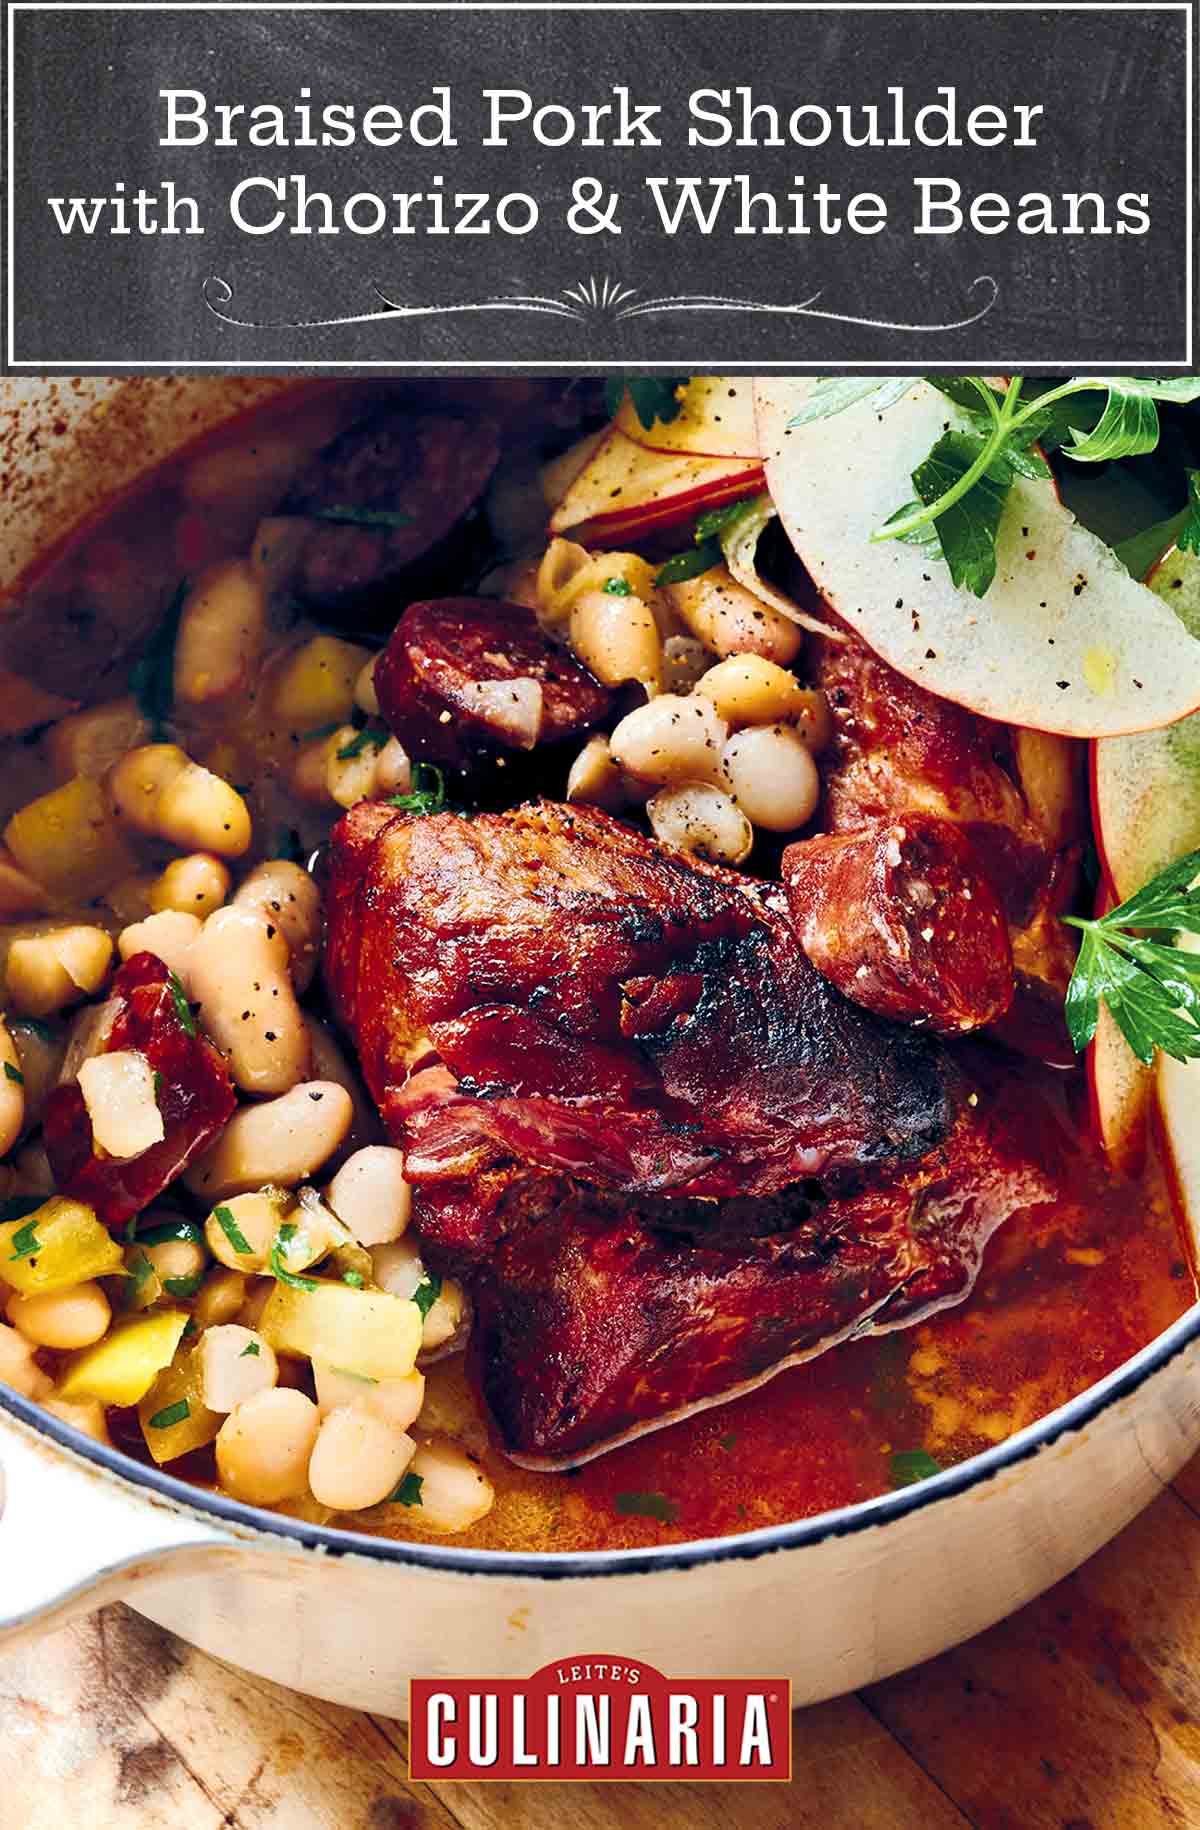 Braised Pork Shoulder with Chorizo and White Beans | Leite's Culinaria